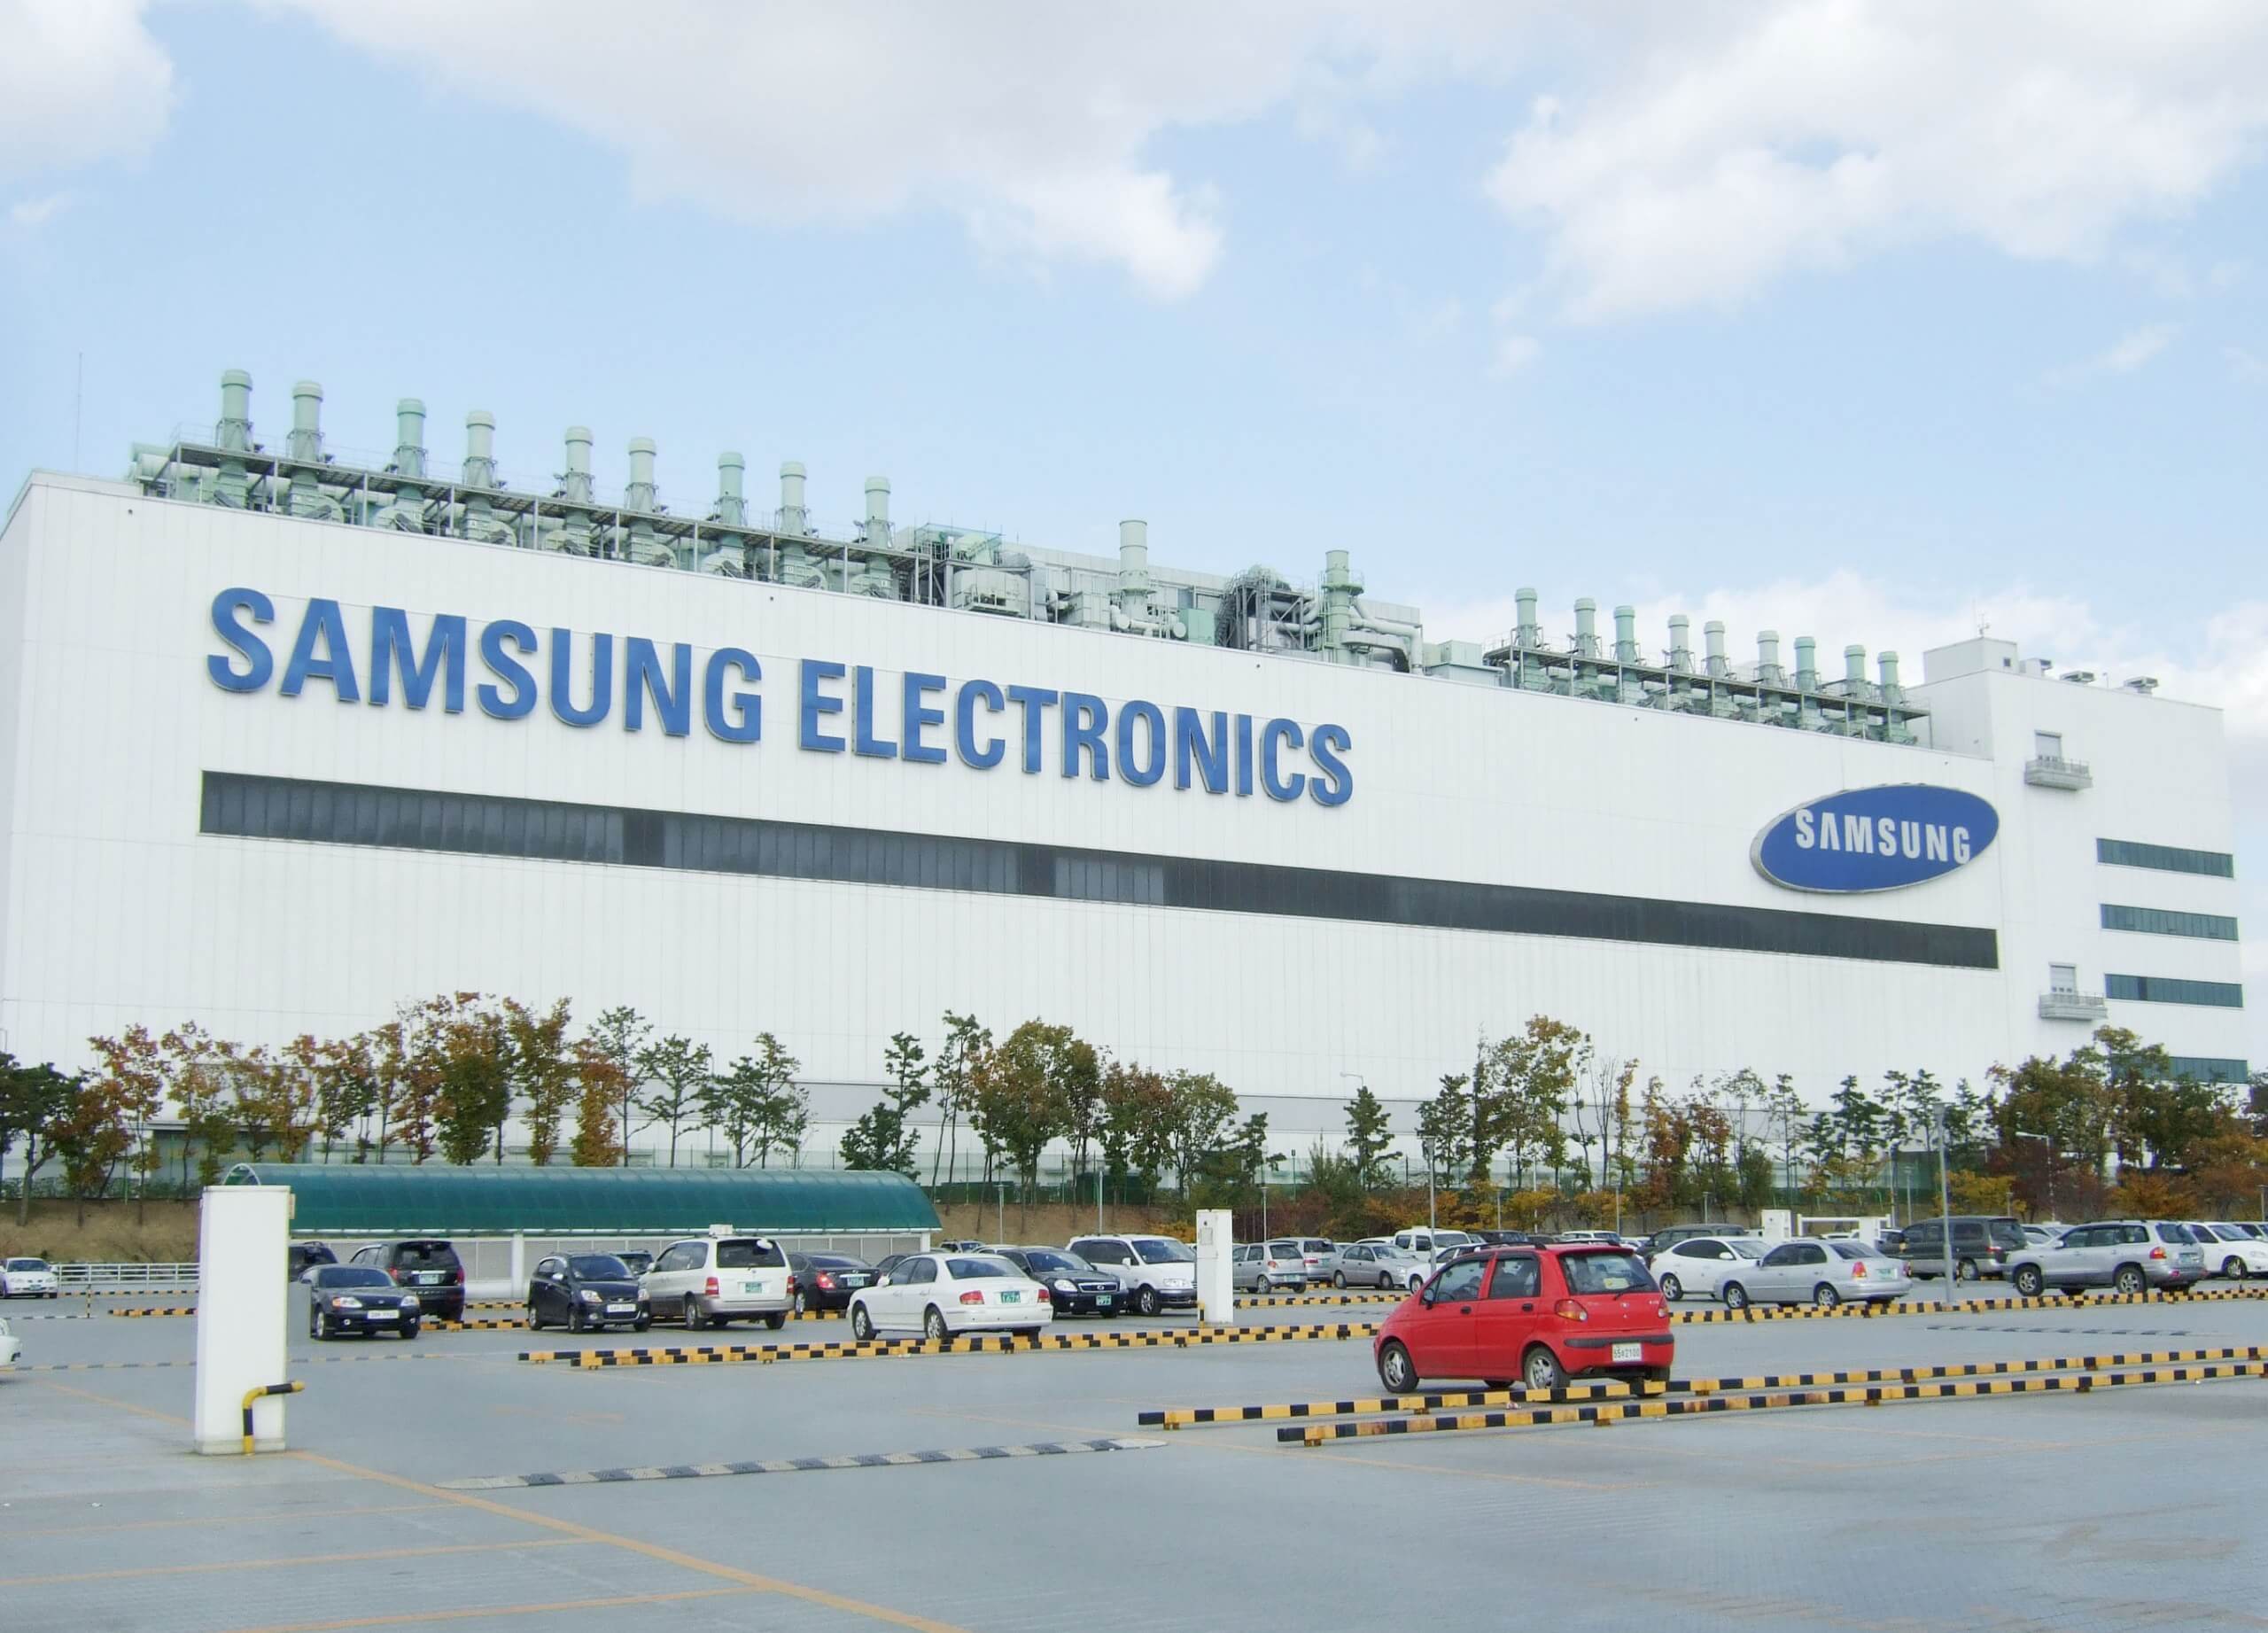 Samsung warns fab employees of ChatGPT after confidential data leaks